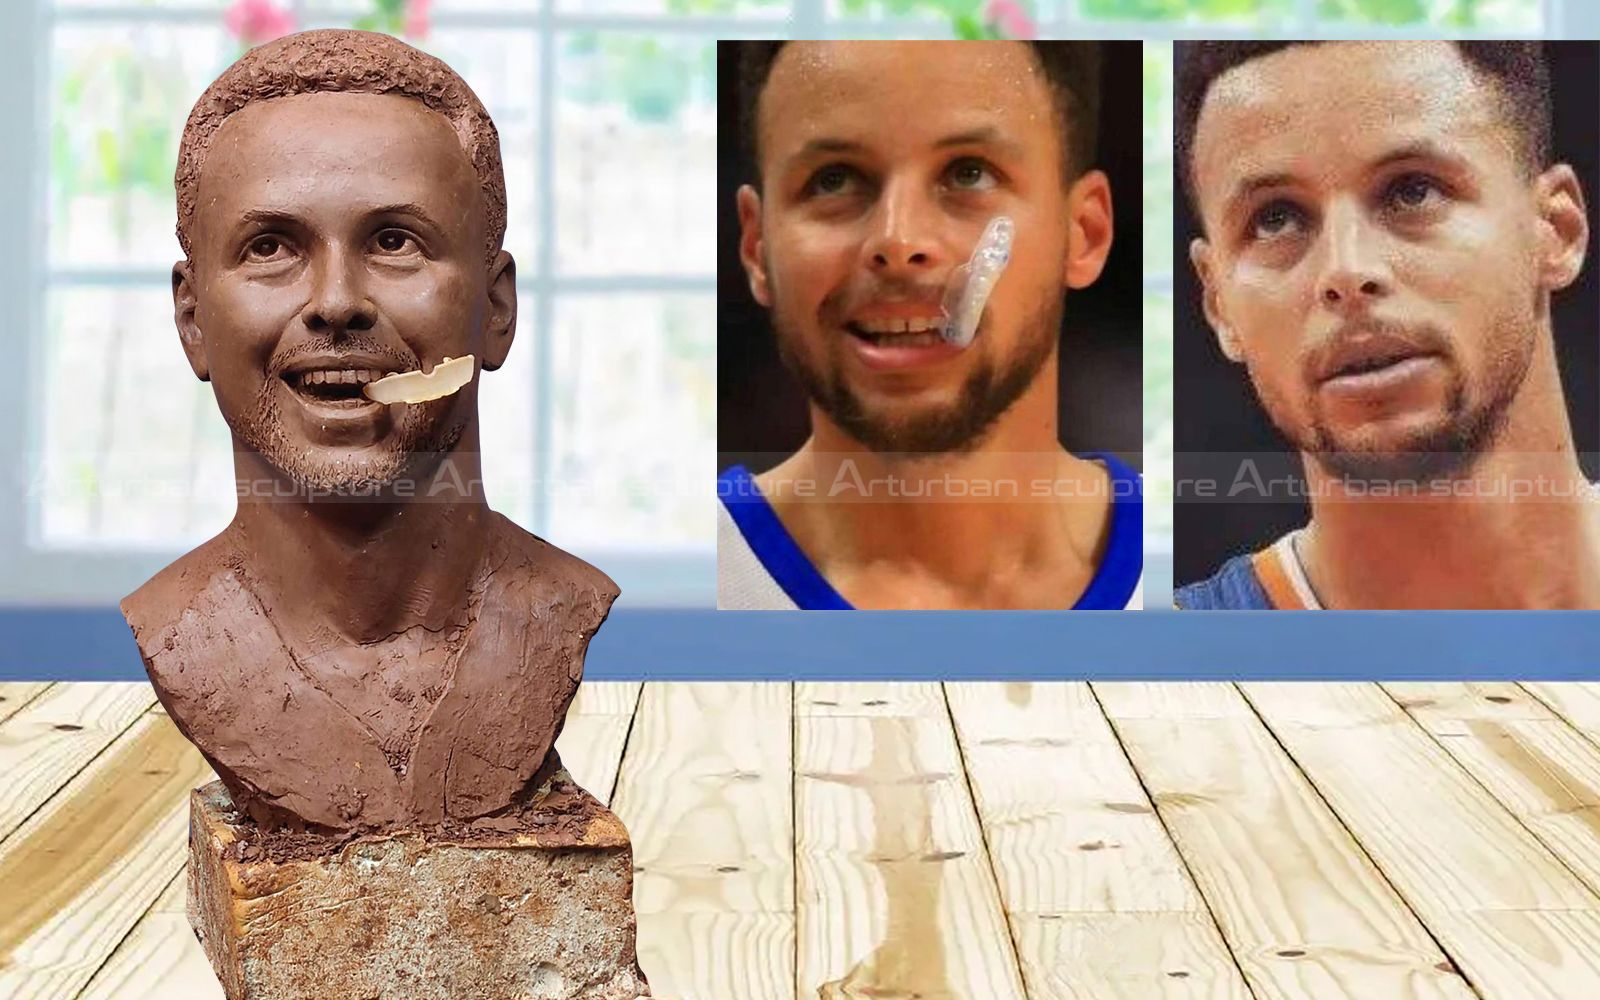 Stephen Curry statue